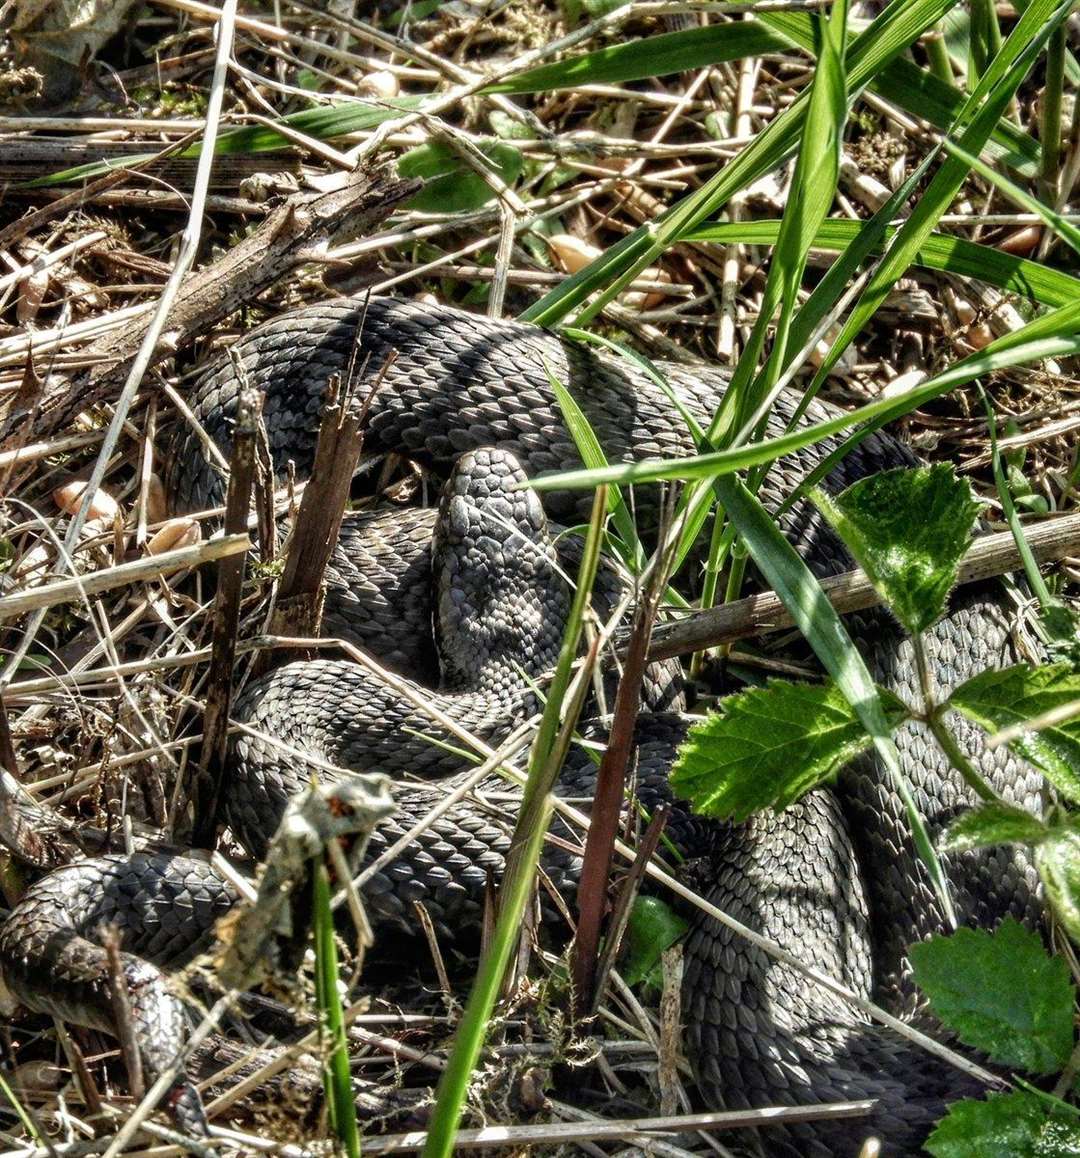 Paul Fouracre took this photo of the snake at Riverside Country Park, in Gillingham.